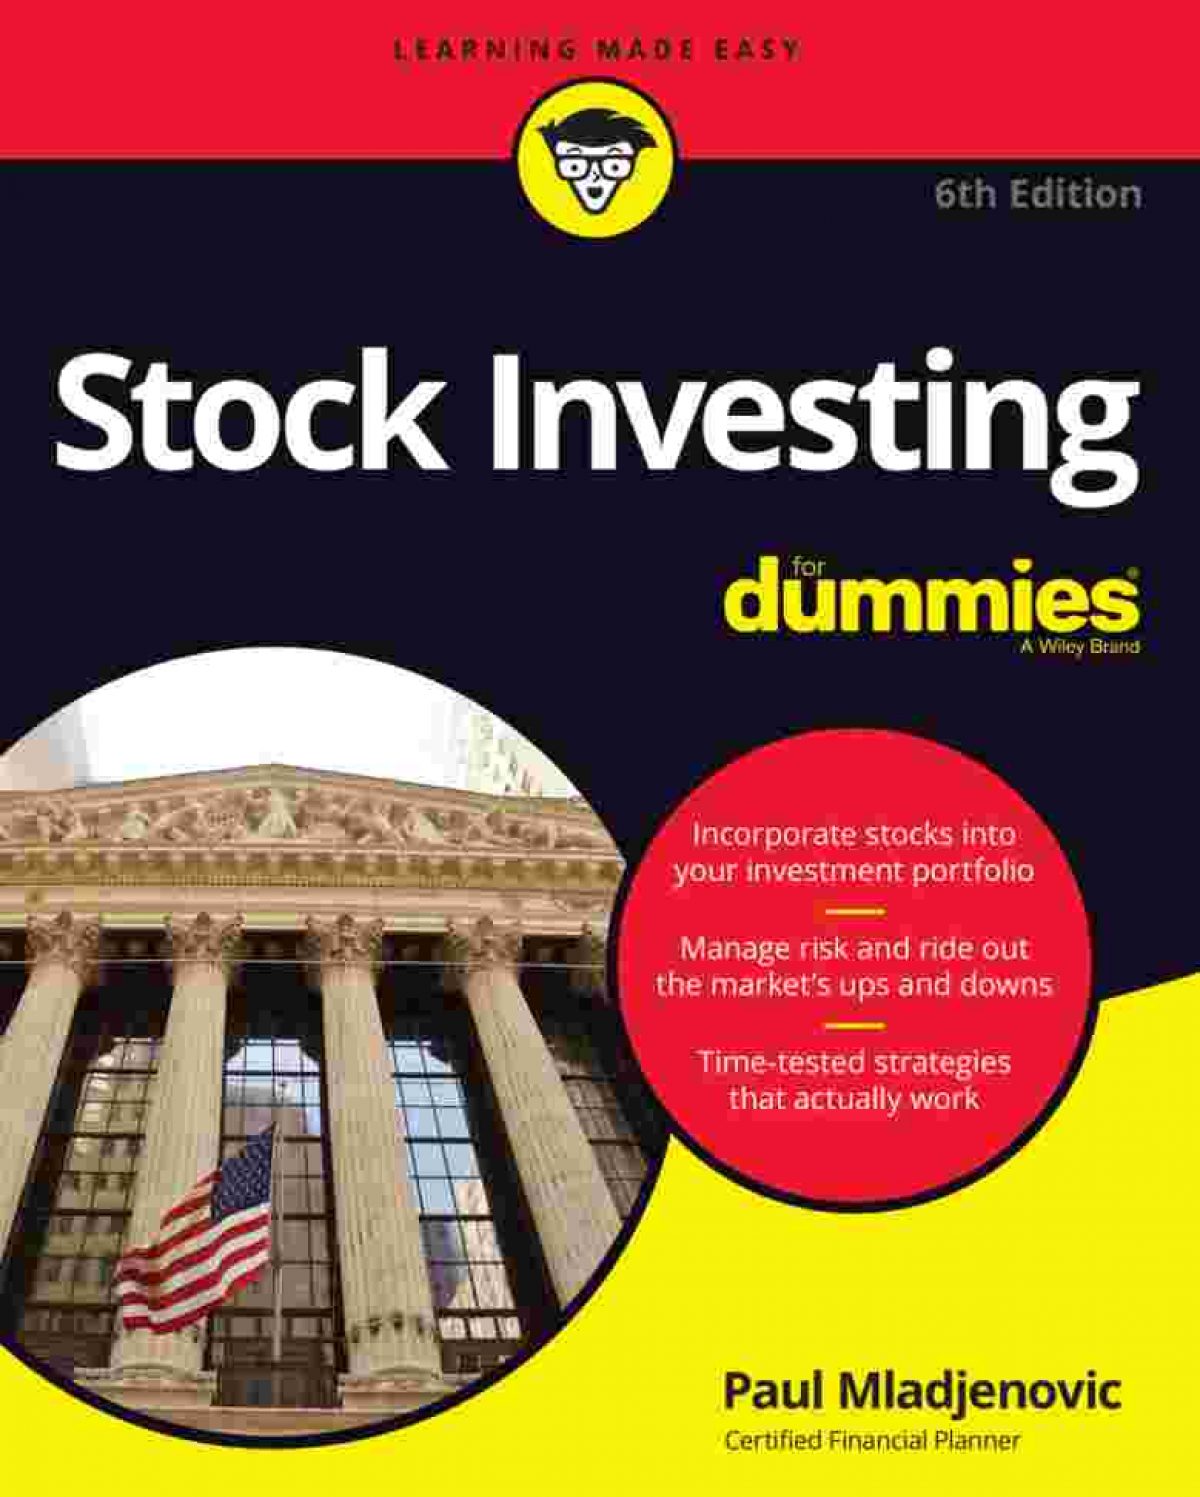 Stock investing for dummies 3rd edition pdf free botany cinemas session times forex